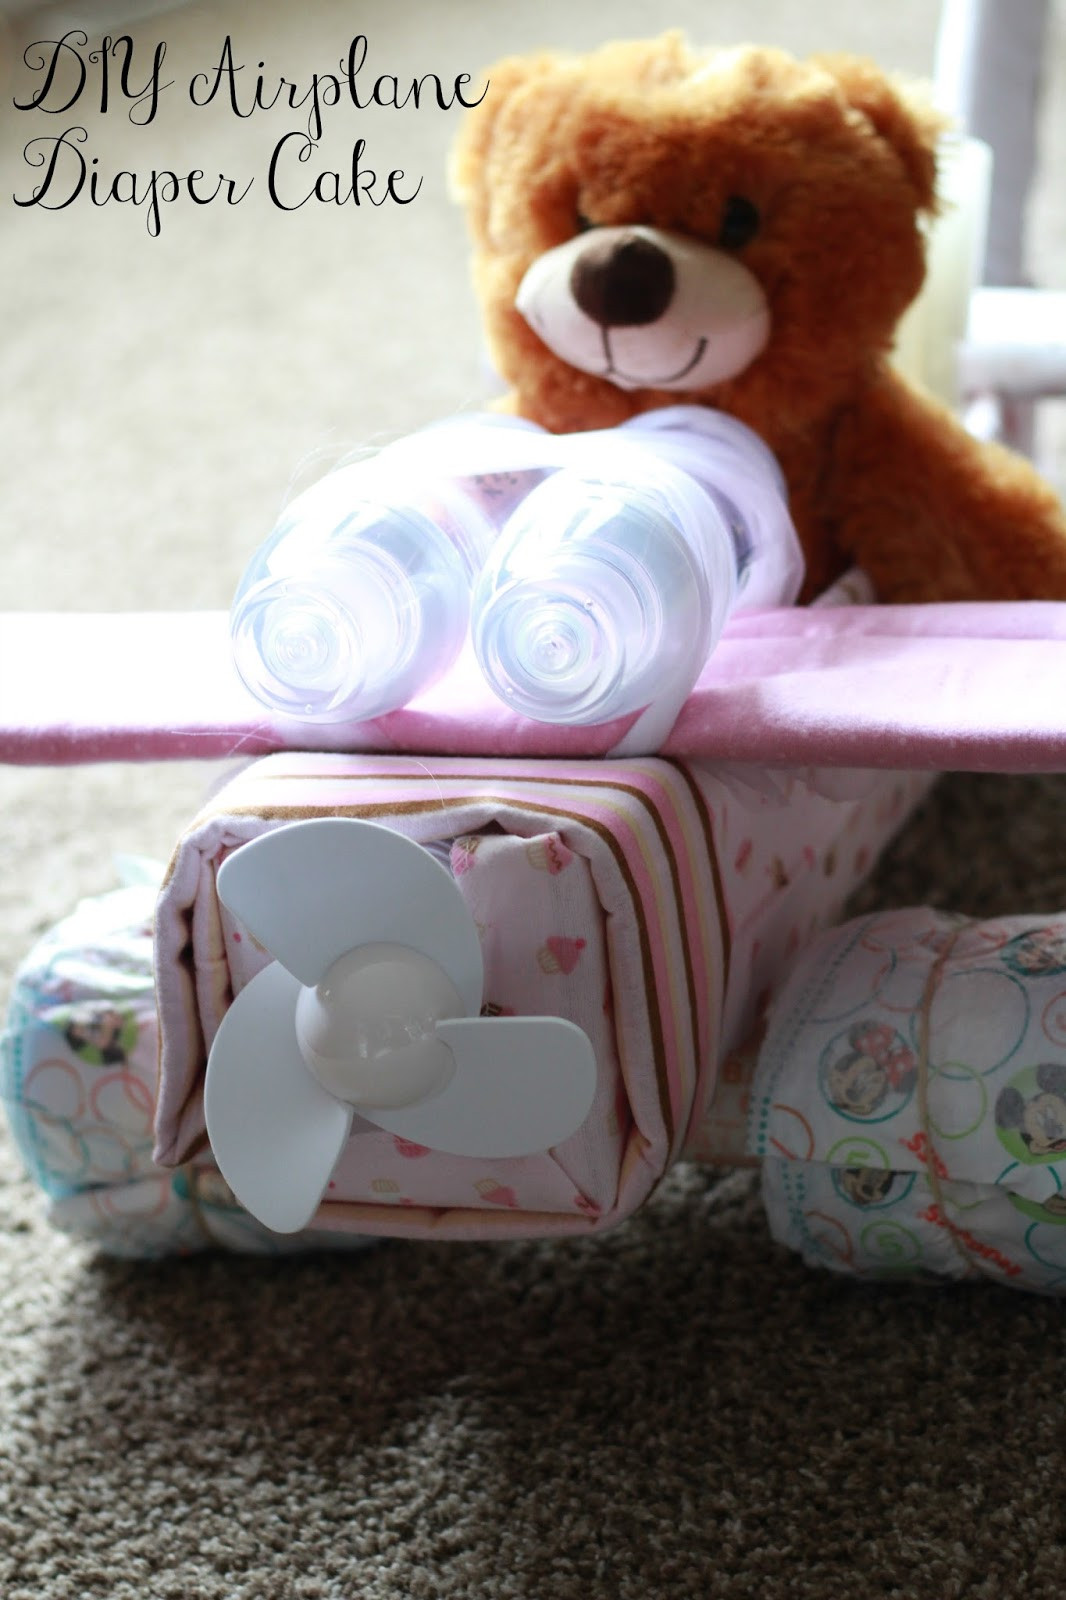 DIY Baby Diaper Cake
 DIY Airplane Diaper Cake Perfect for baby shower ts